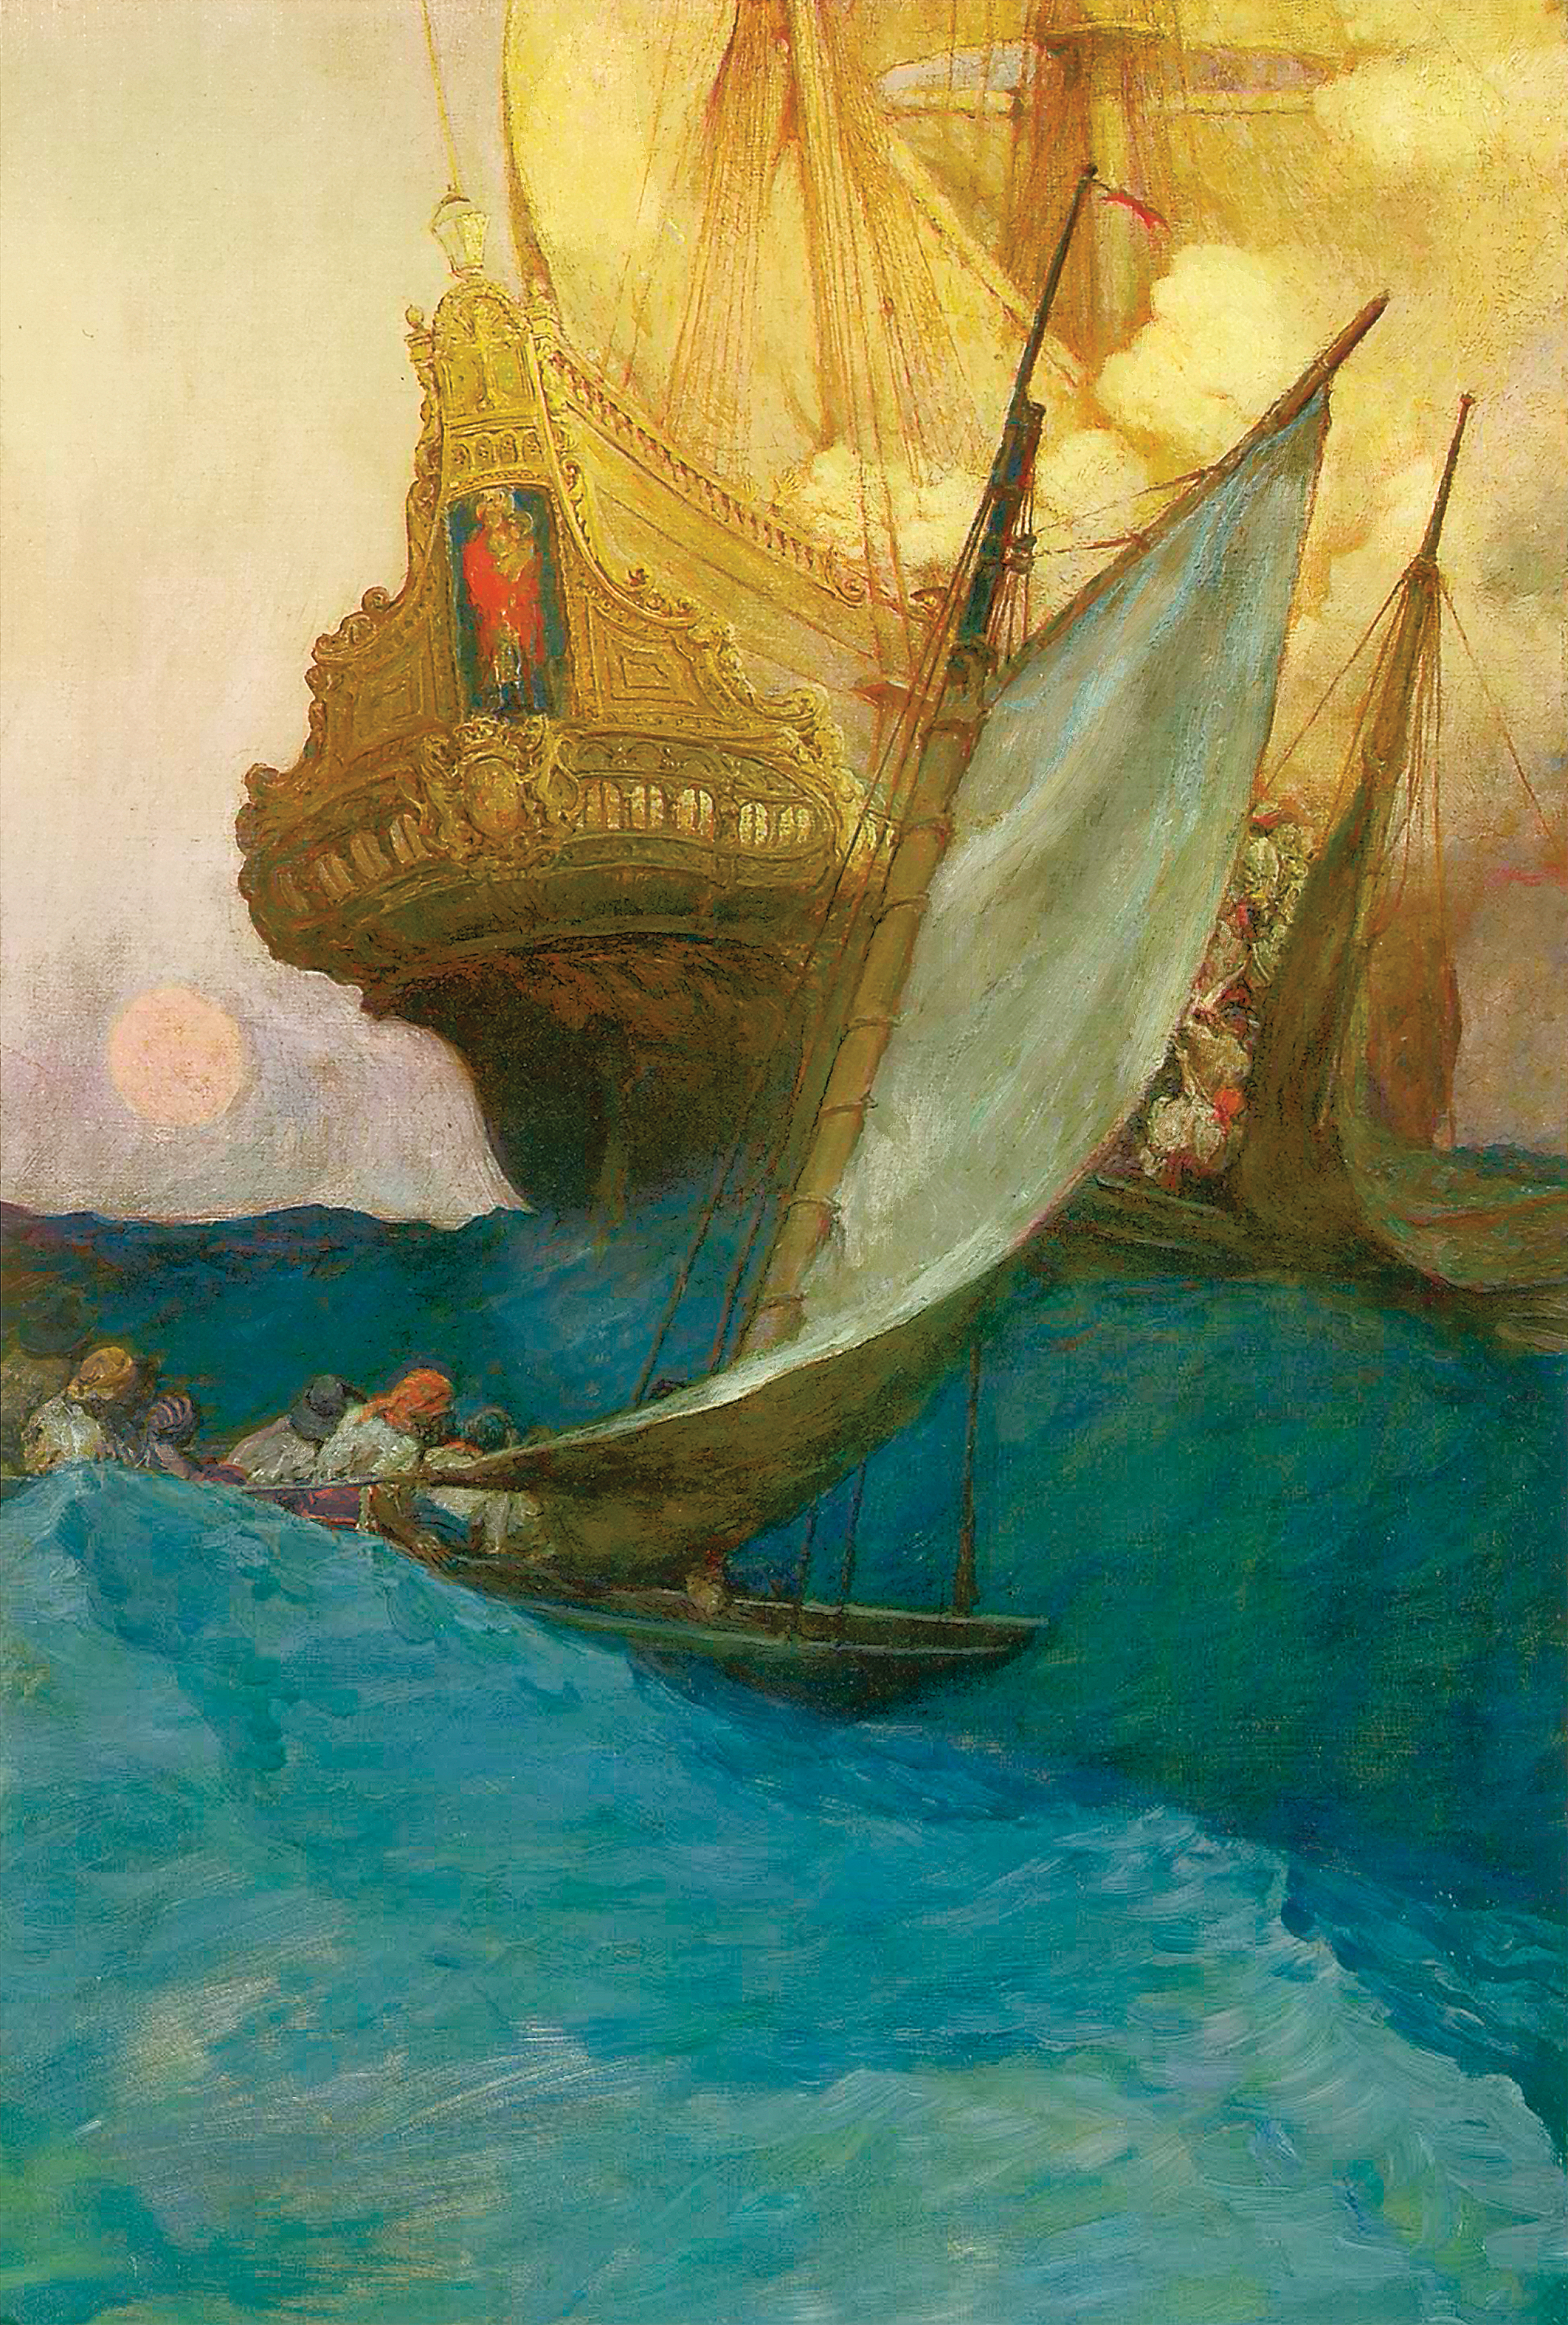 famous pirate ship painting